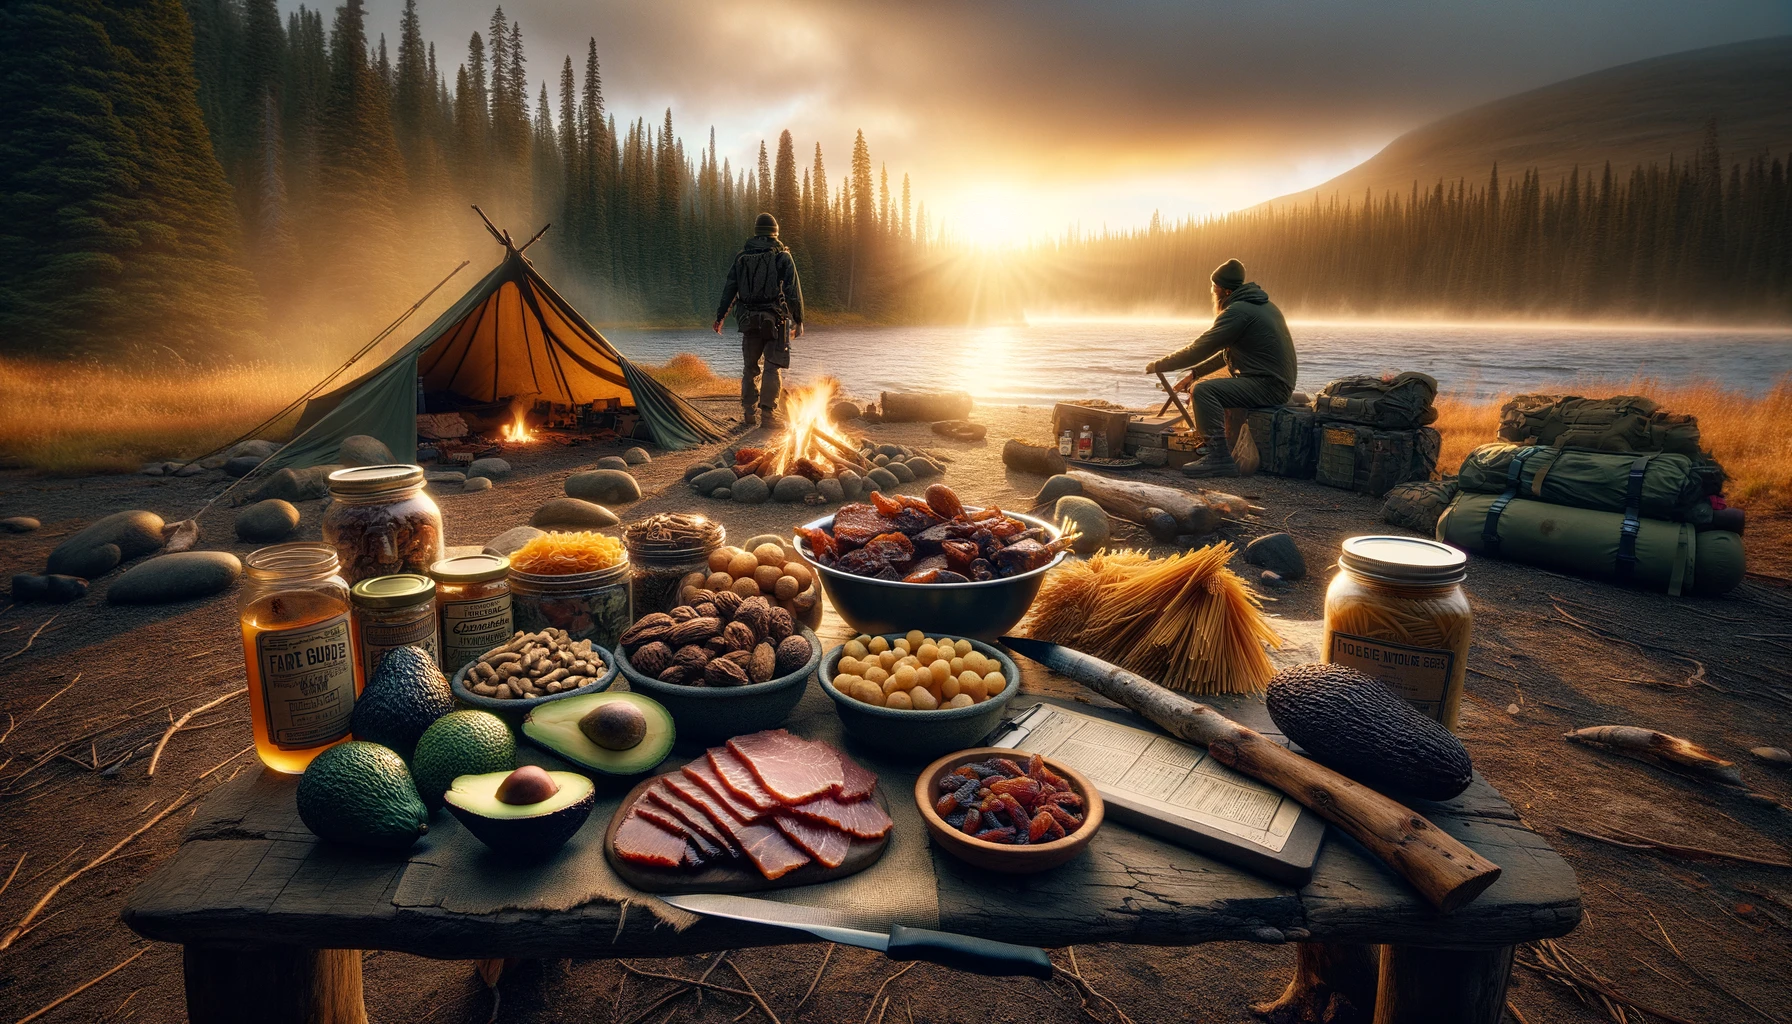 Dawn at a wilderness campsite highlighting the role of fats and carbohydrates in survival diet, with foods like avocados, nuts, seeds, and whole grains near a campfire, embodying energy and endurance in a serene yet rugged landscape